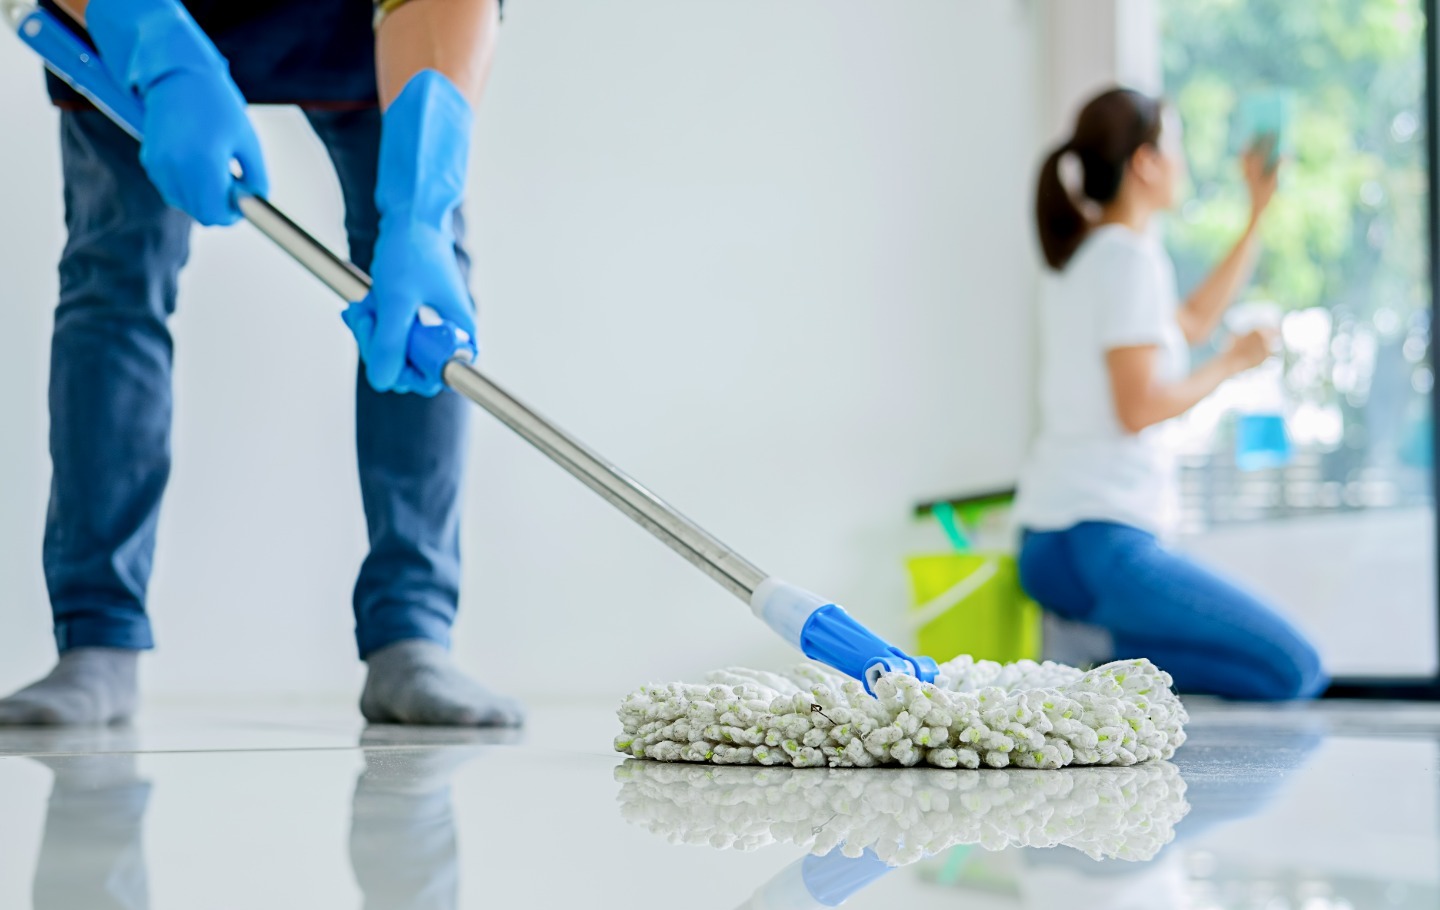 ct-cleaning-services